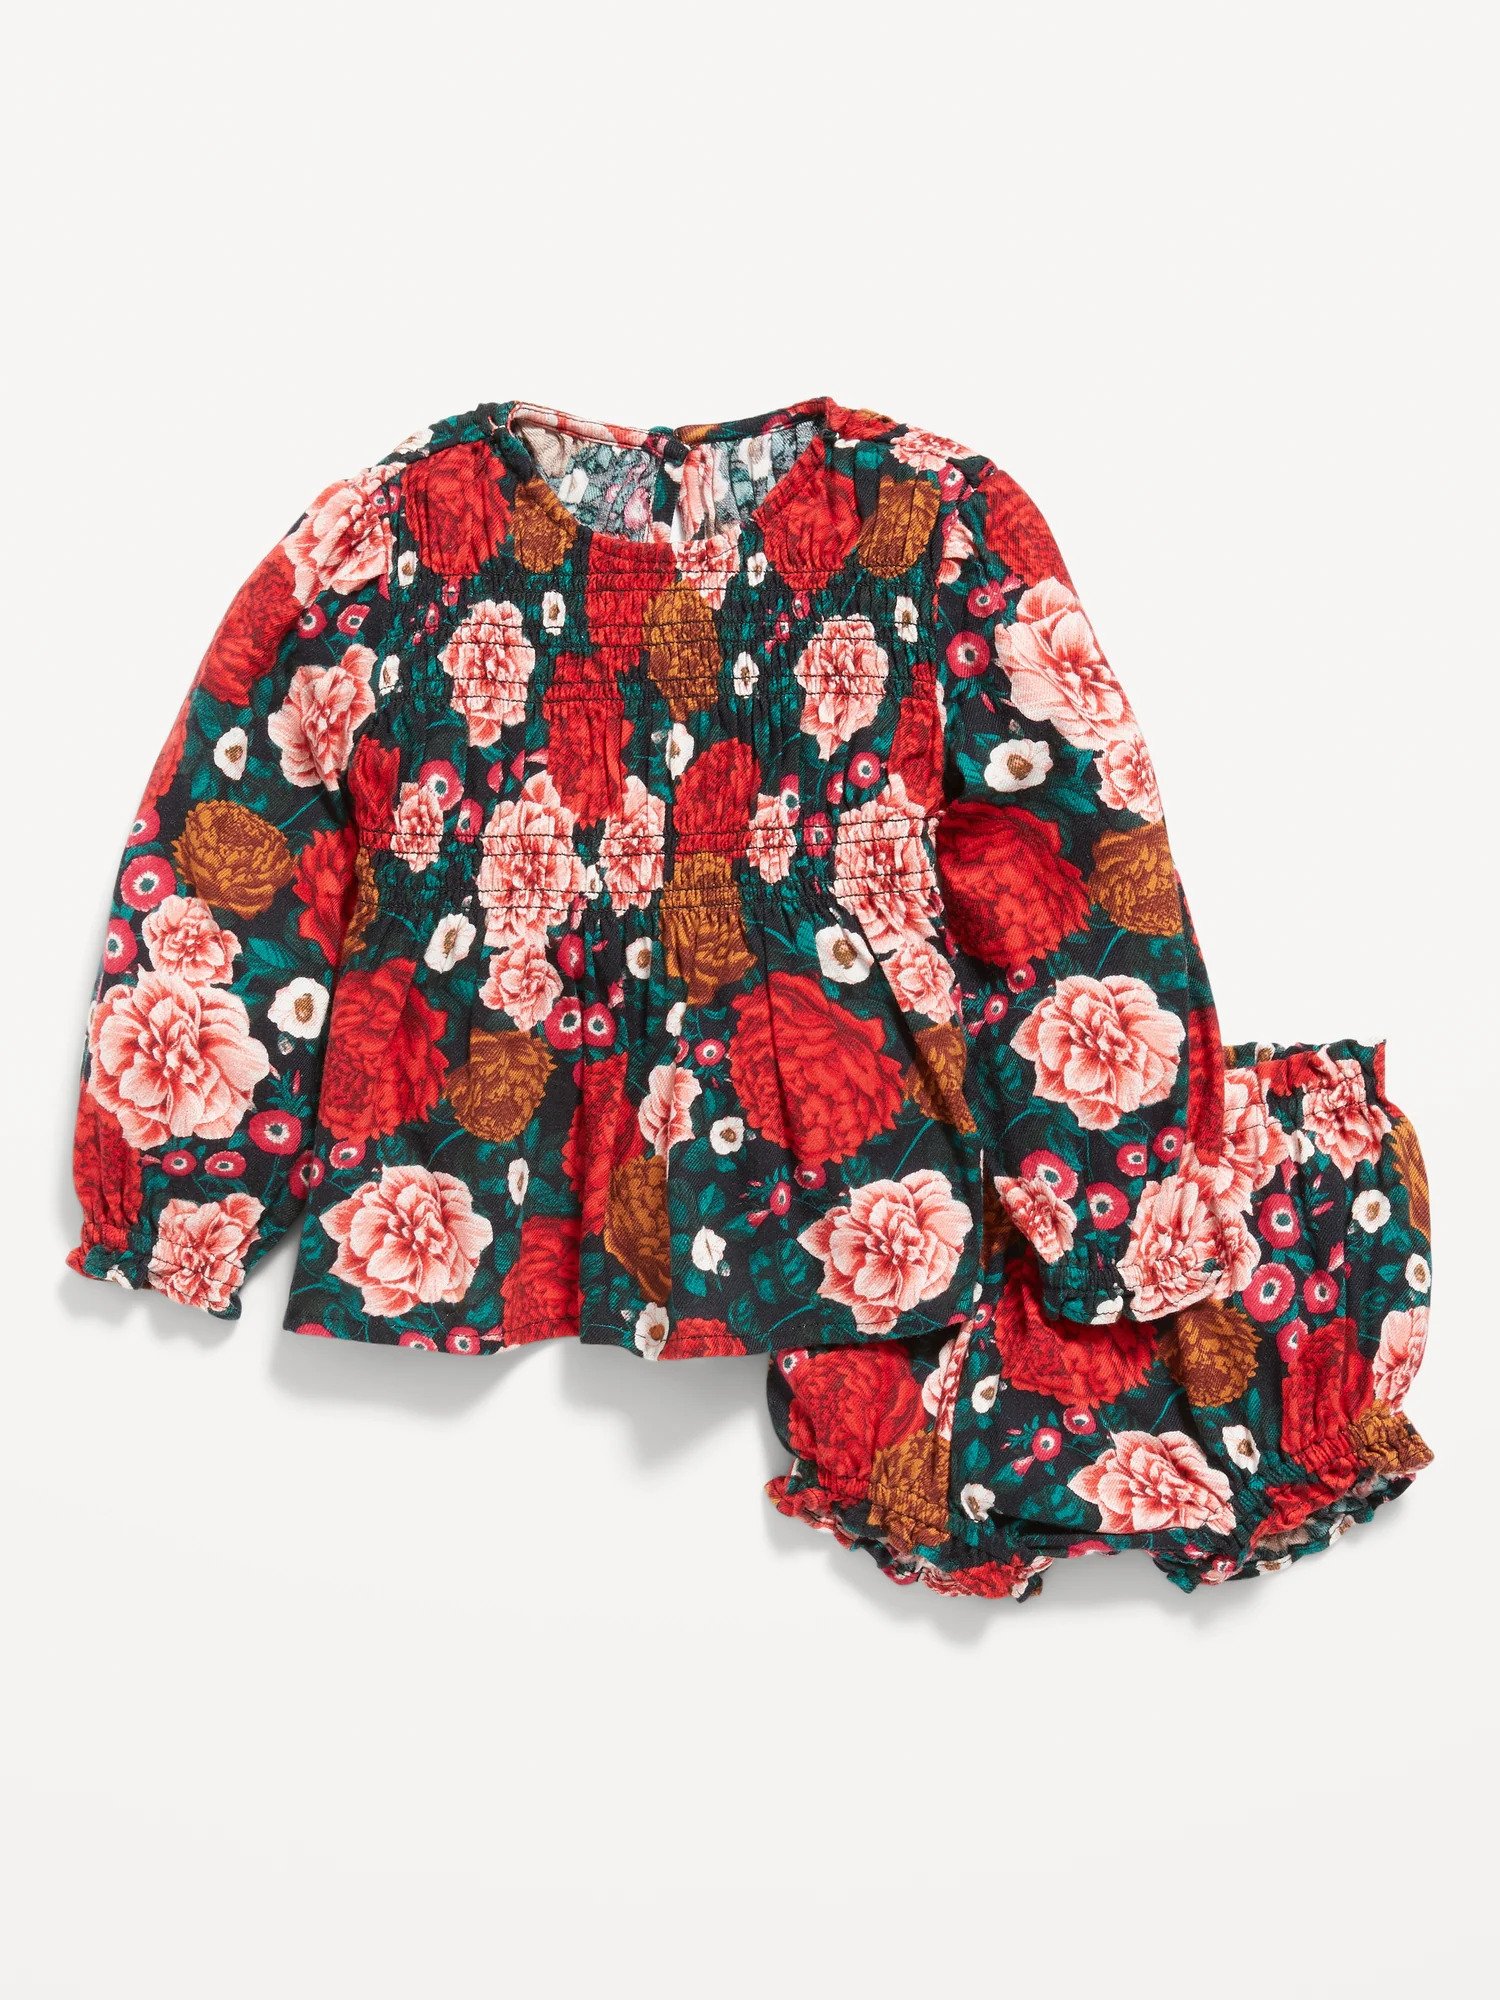    Floral Long-Sleeve Top and Bloomer Shorts Set for Baby, P1,650   